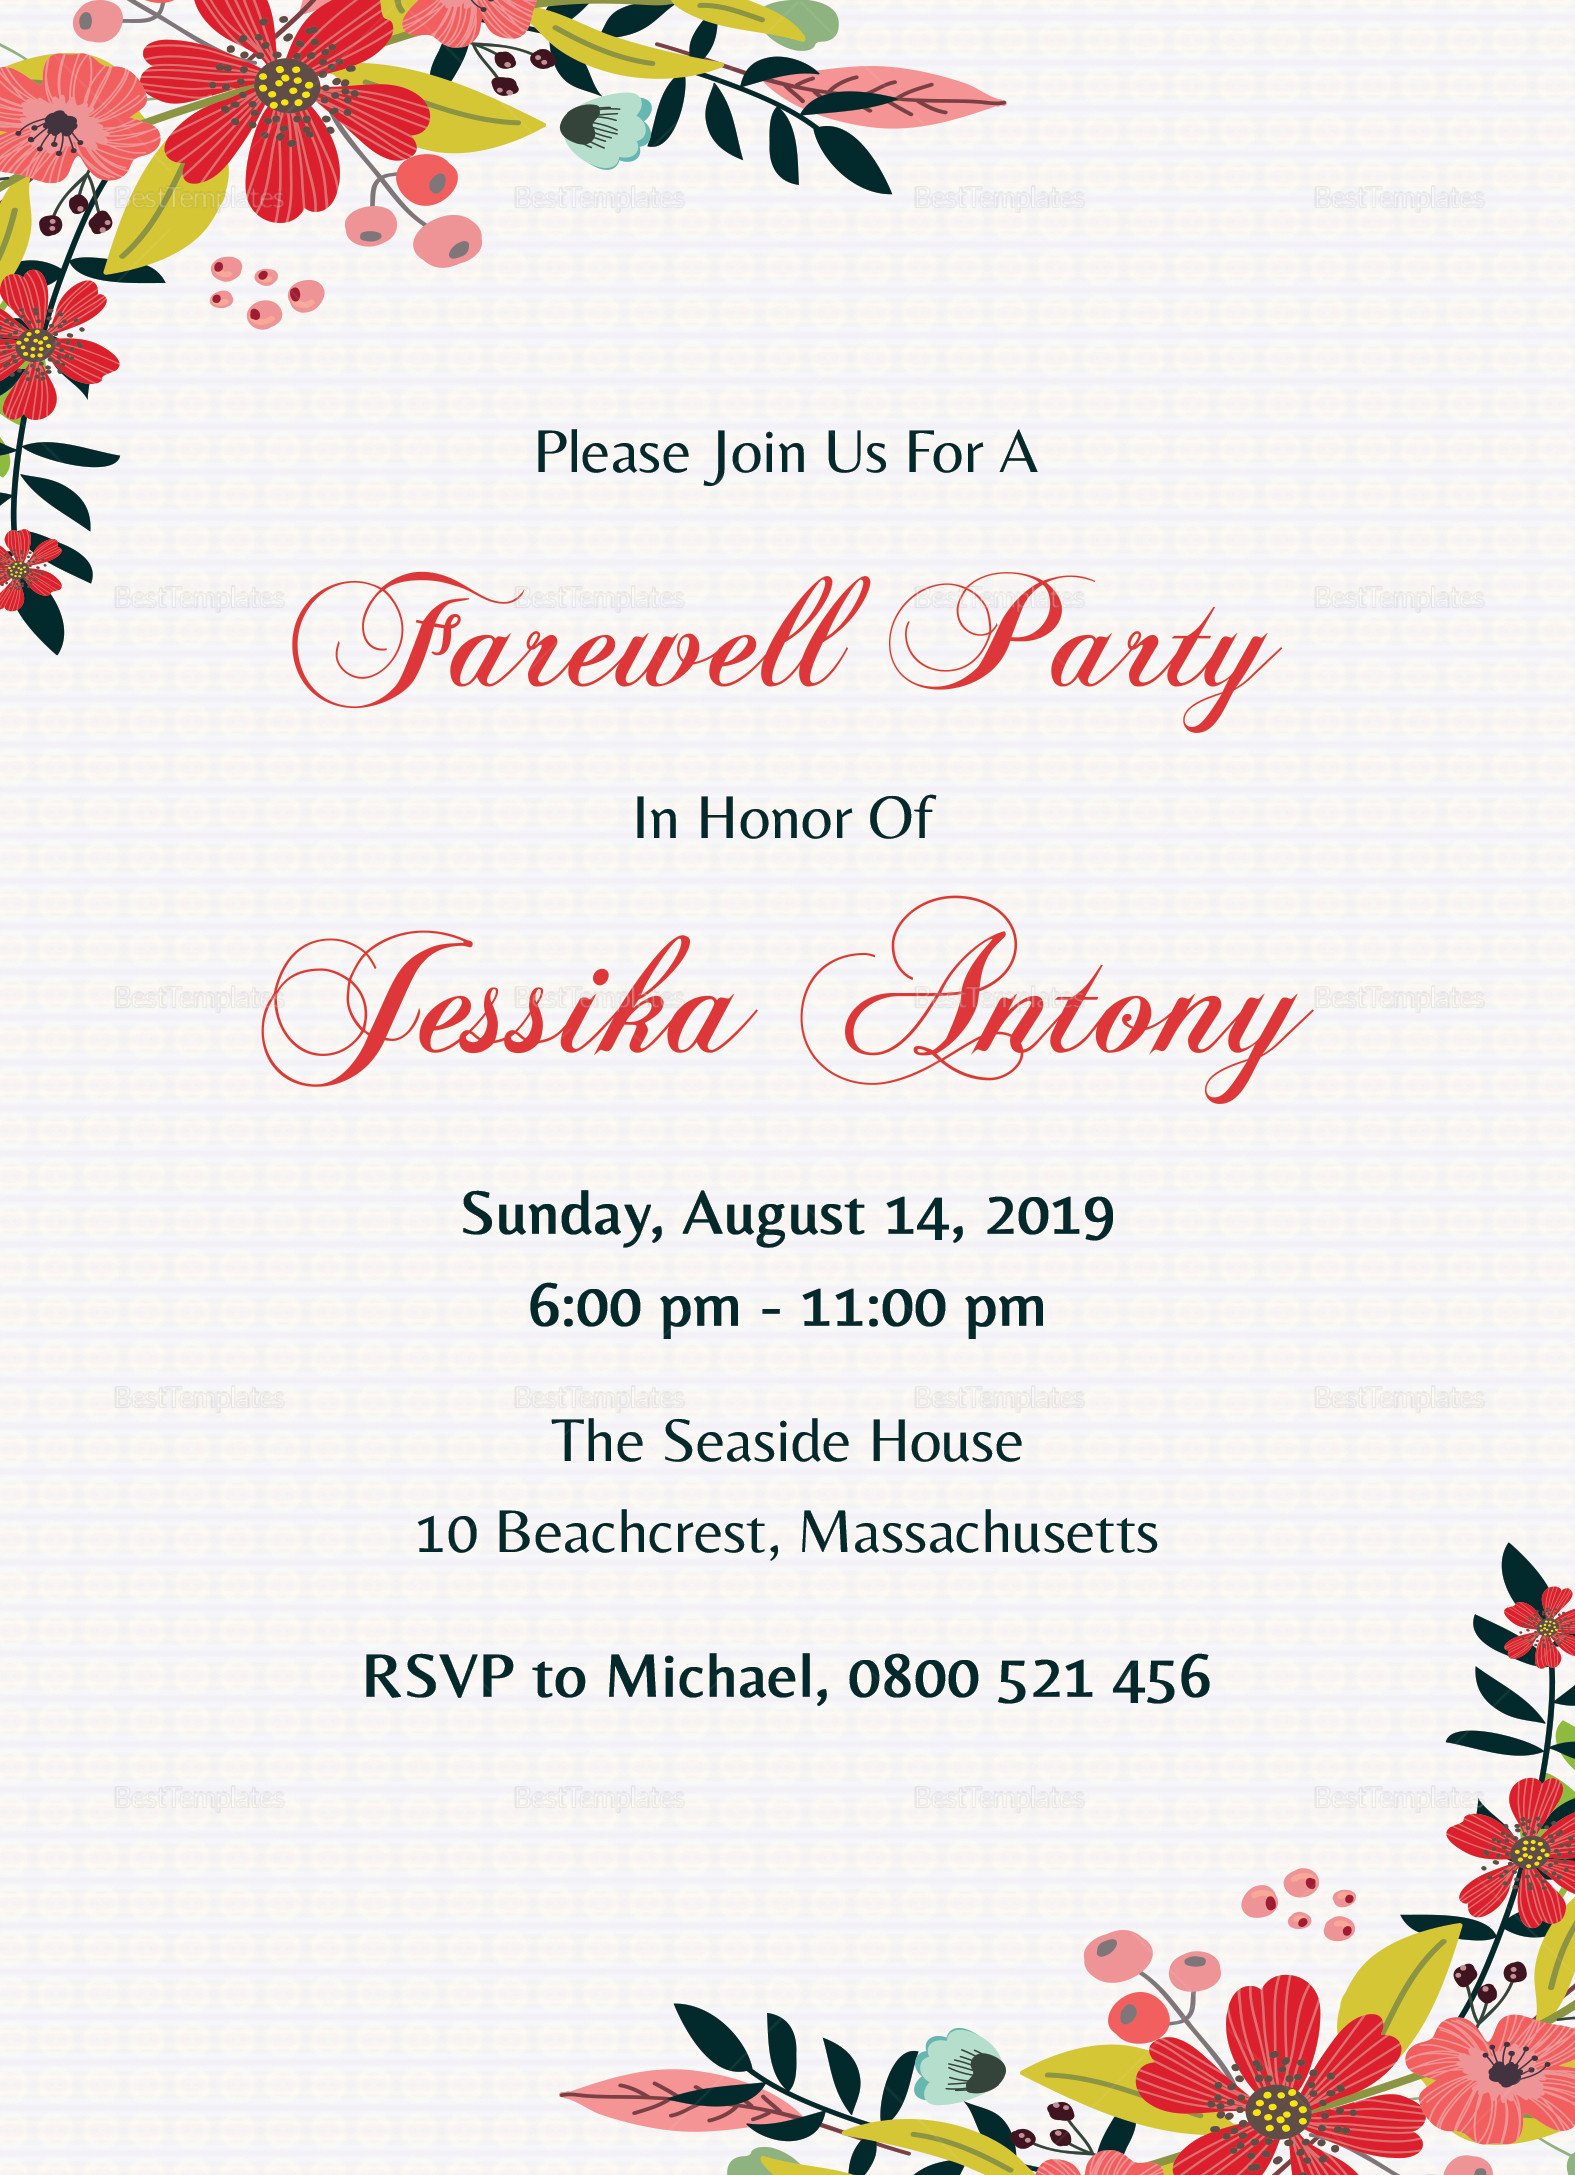 Farewell Party Invitation Template Free Classic Farewell Party Invitation Design Template In Word